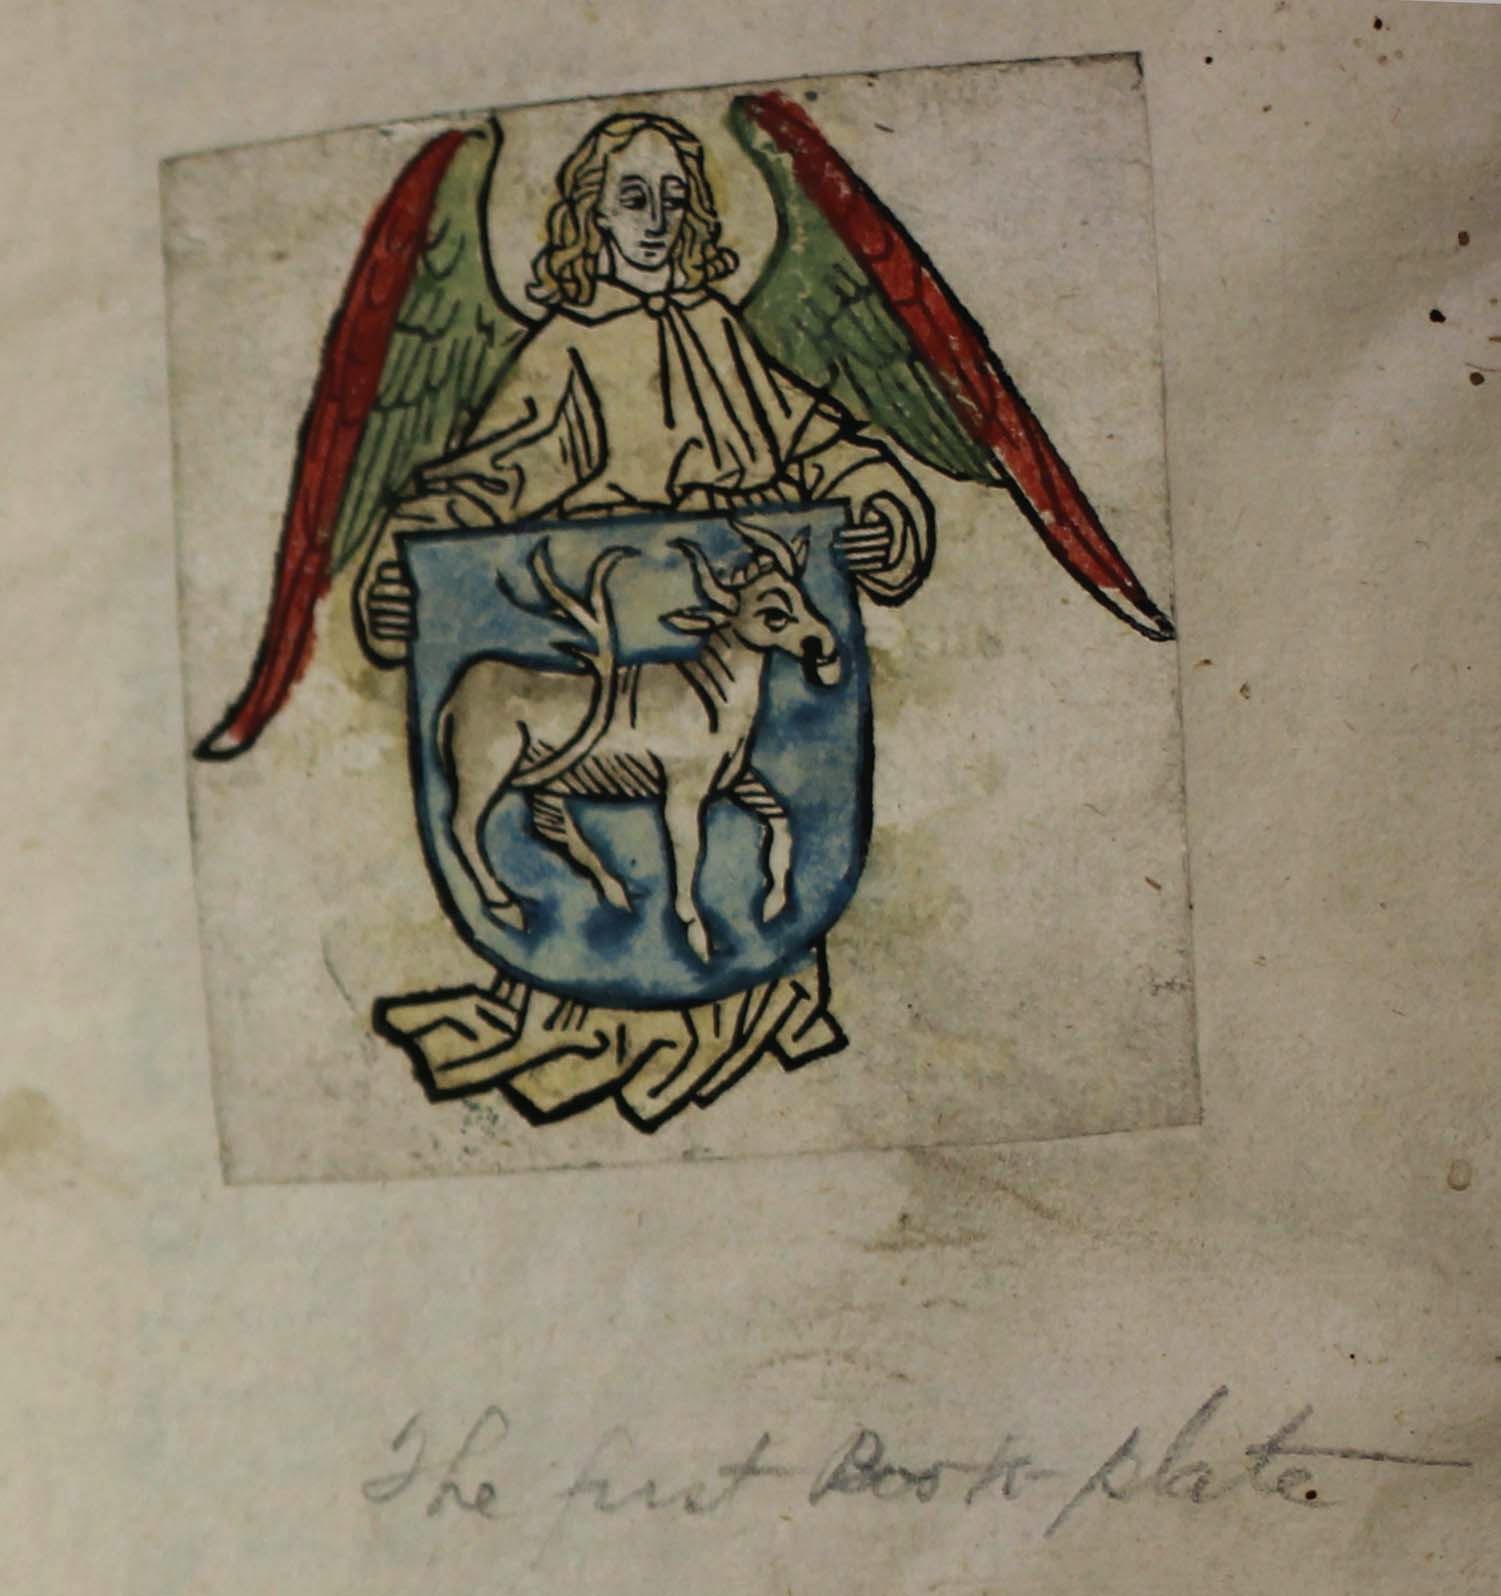 Illustration, which is labelled in pencil "The first book plate," depicts of an angel holding a shield with picture of a goat.